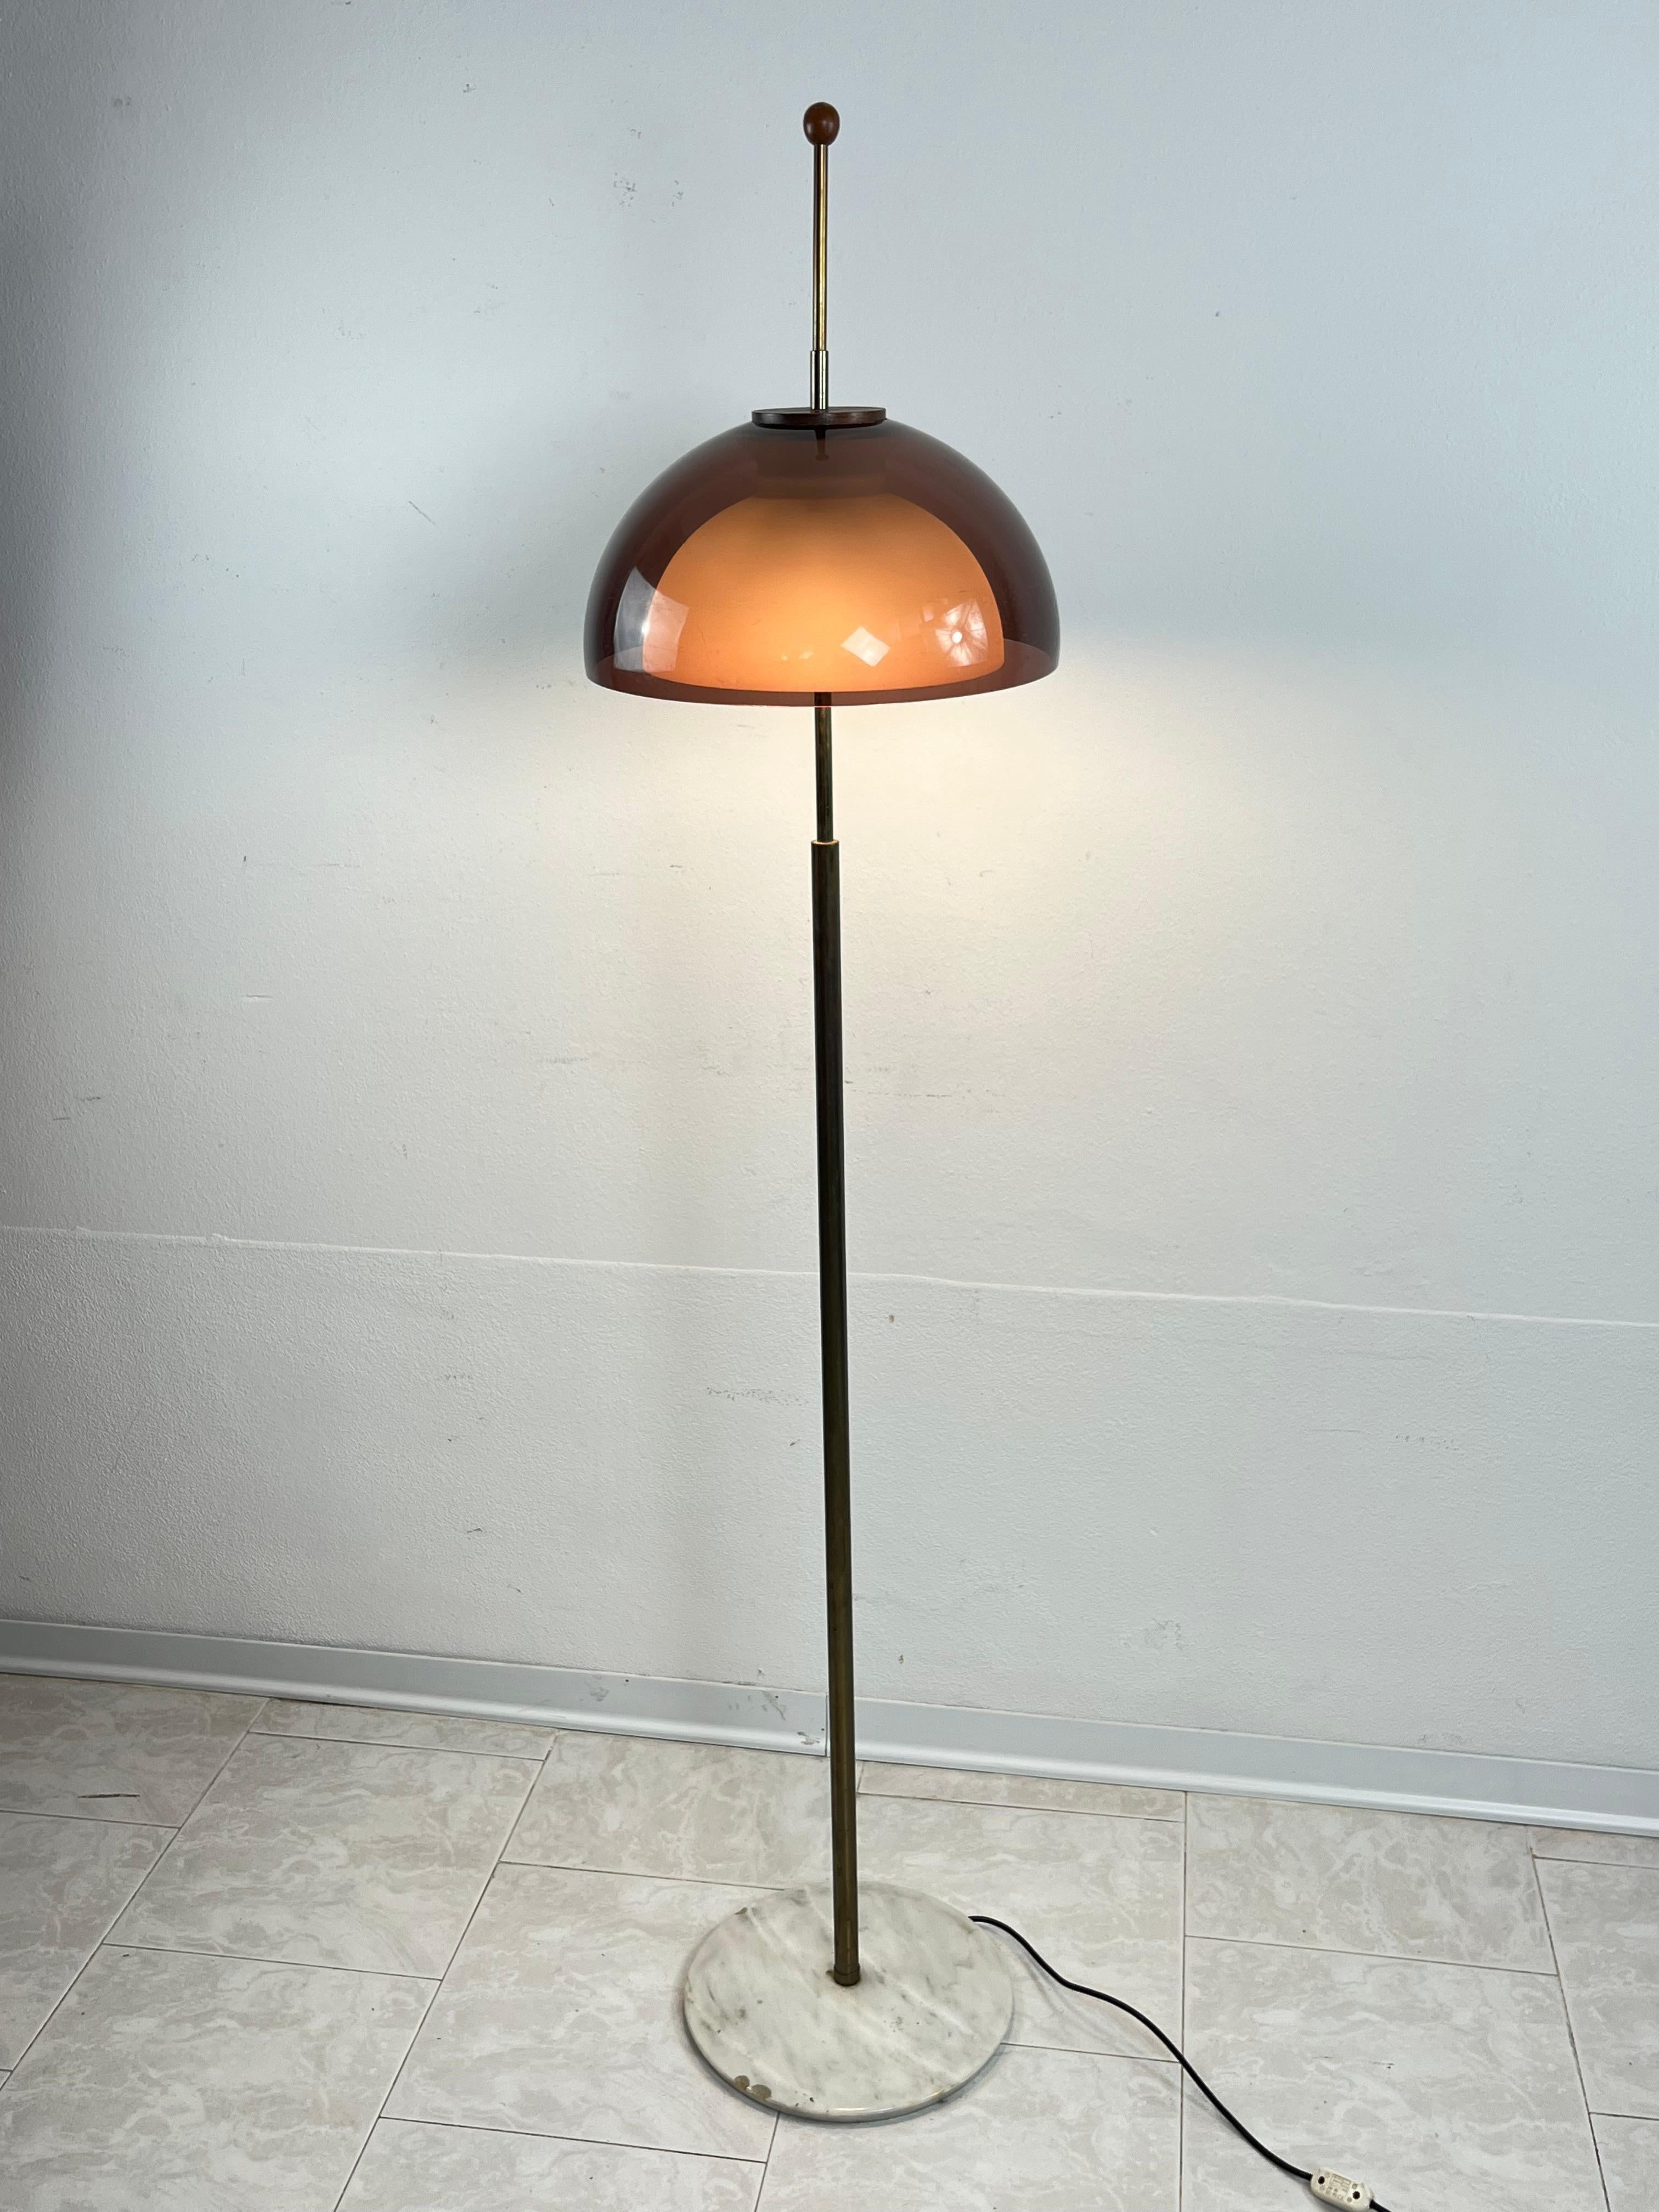 3-light floor lamp Stilux Milano plexiglass and glass Mid-Century Italian design 1969
Metal structure with brass accessories. Opaline glass and purple colored plexiglass are the overlapping diffuser.
Marble base. E14 lamps.
Integral and working.